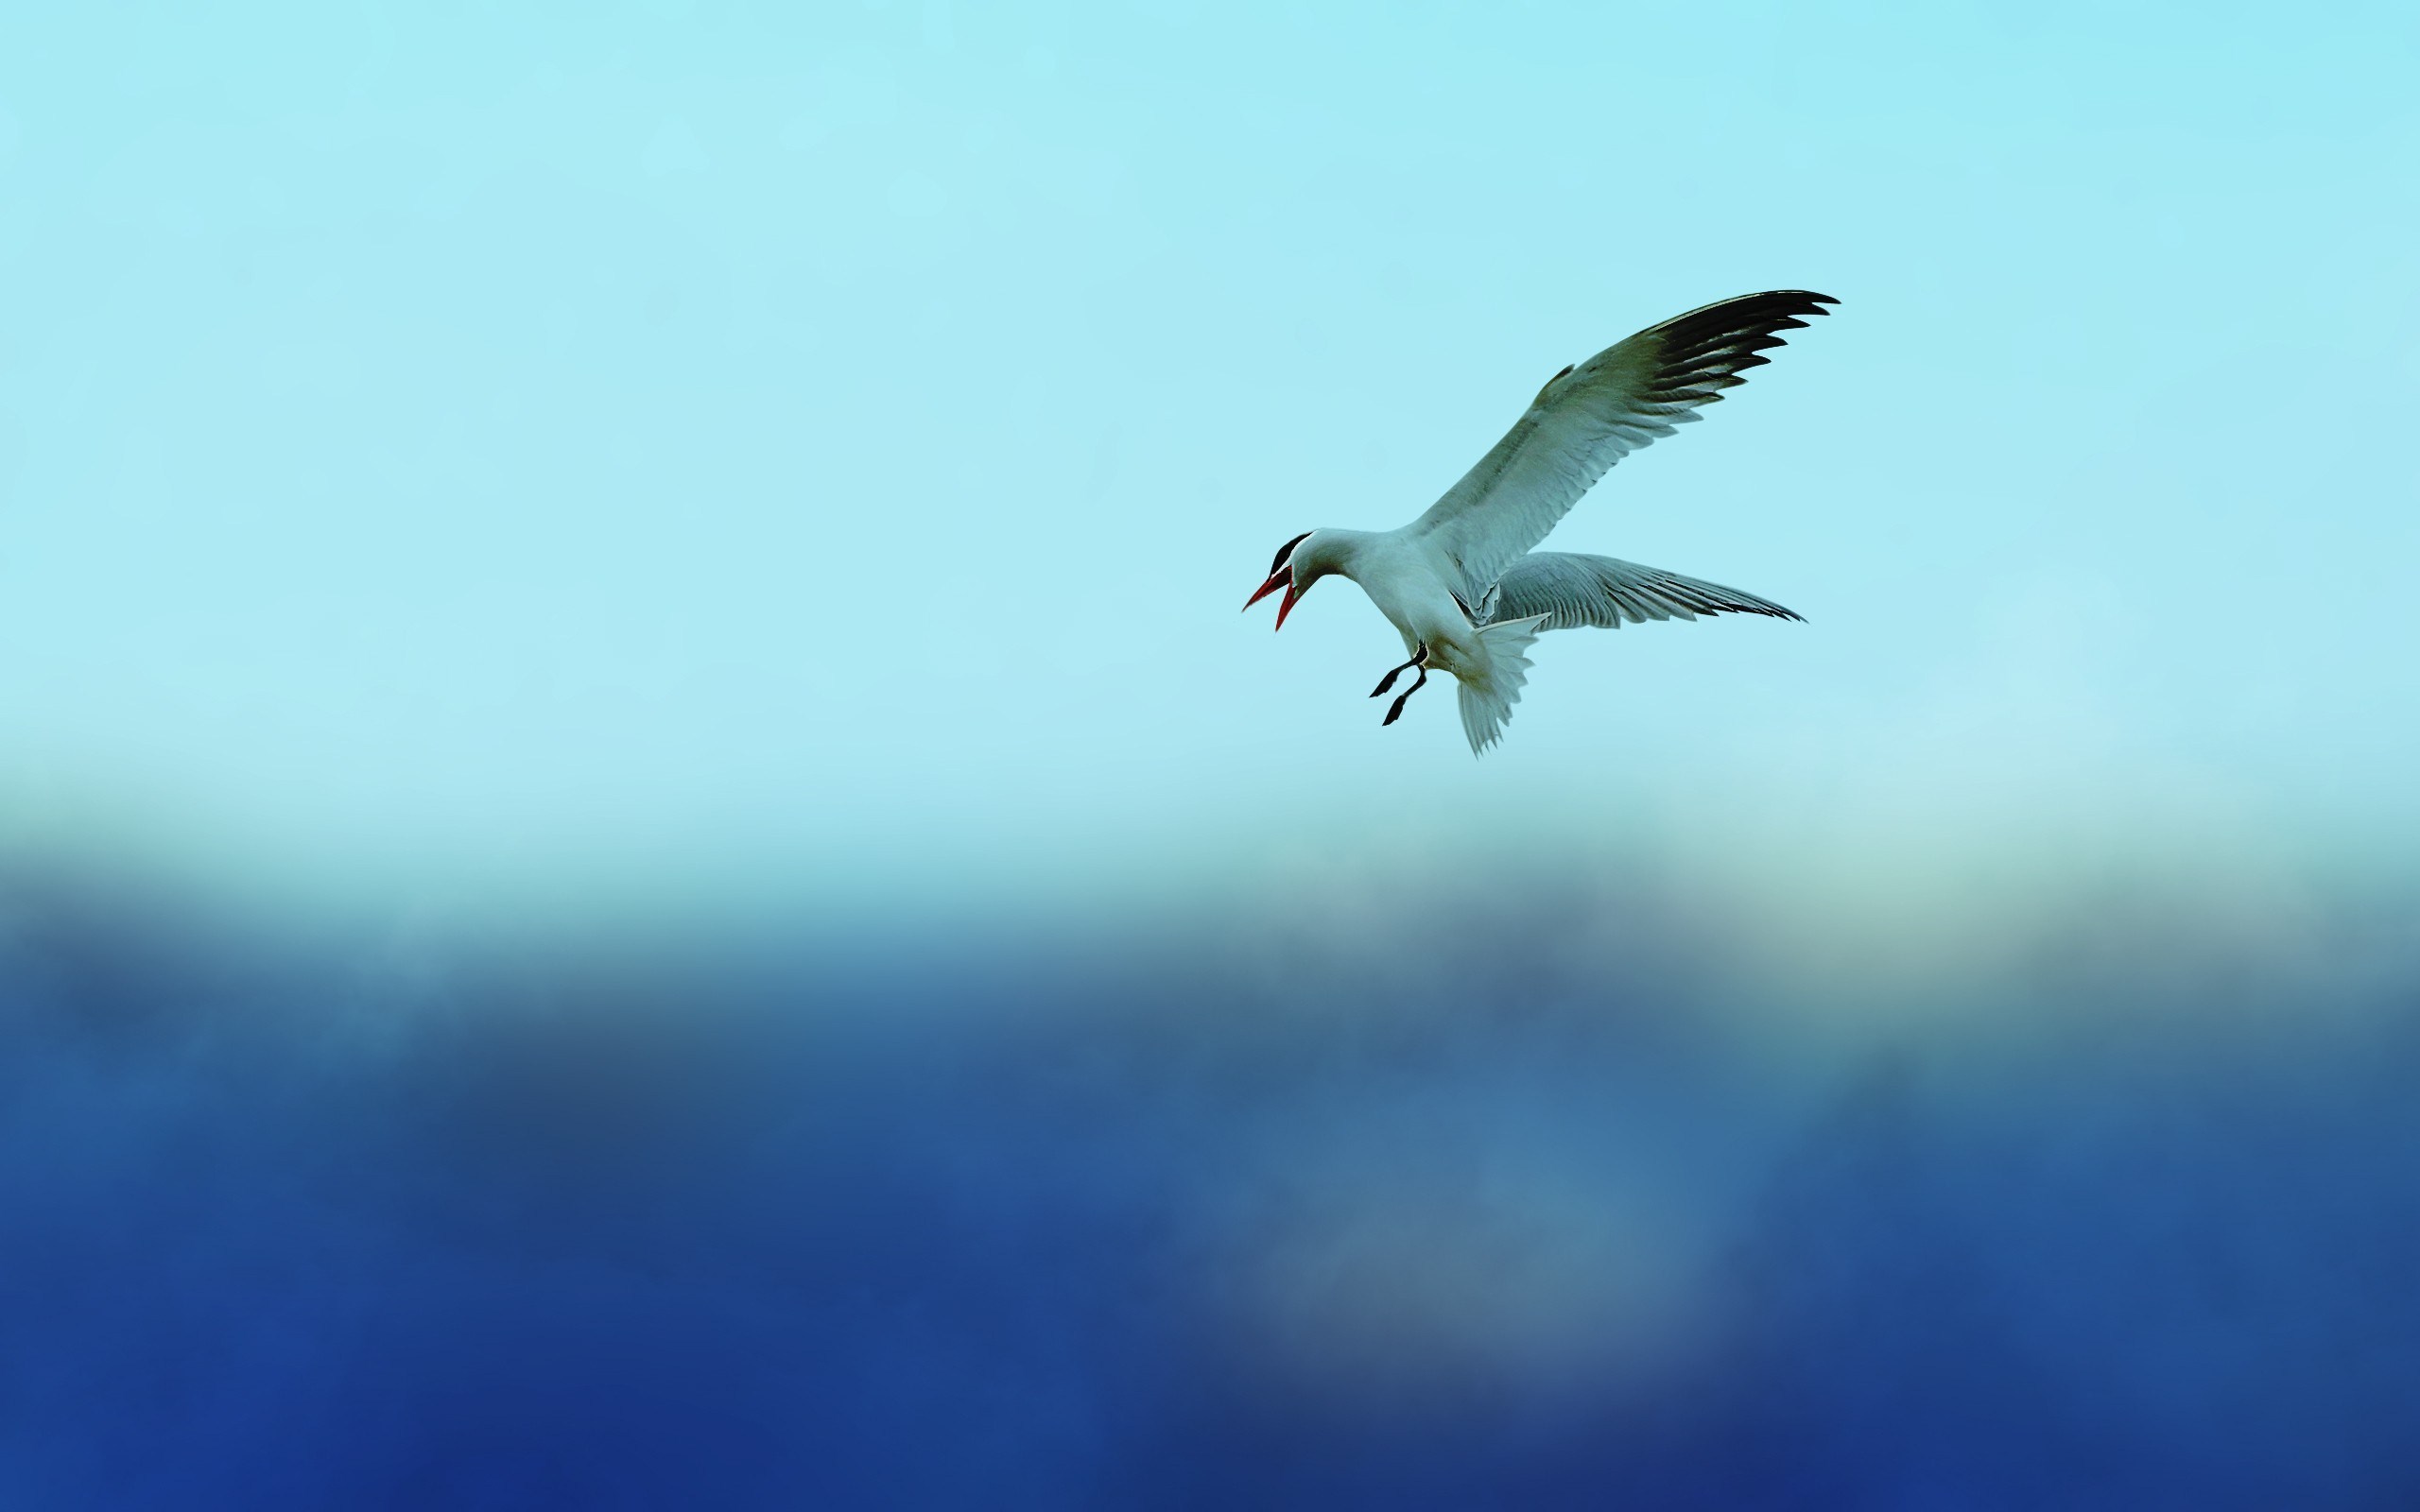 Flying, Seagull - Photography Wallpapers #522540 on Wookmark